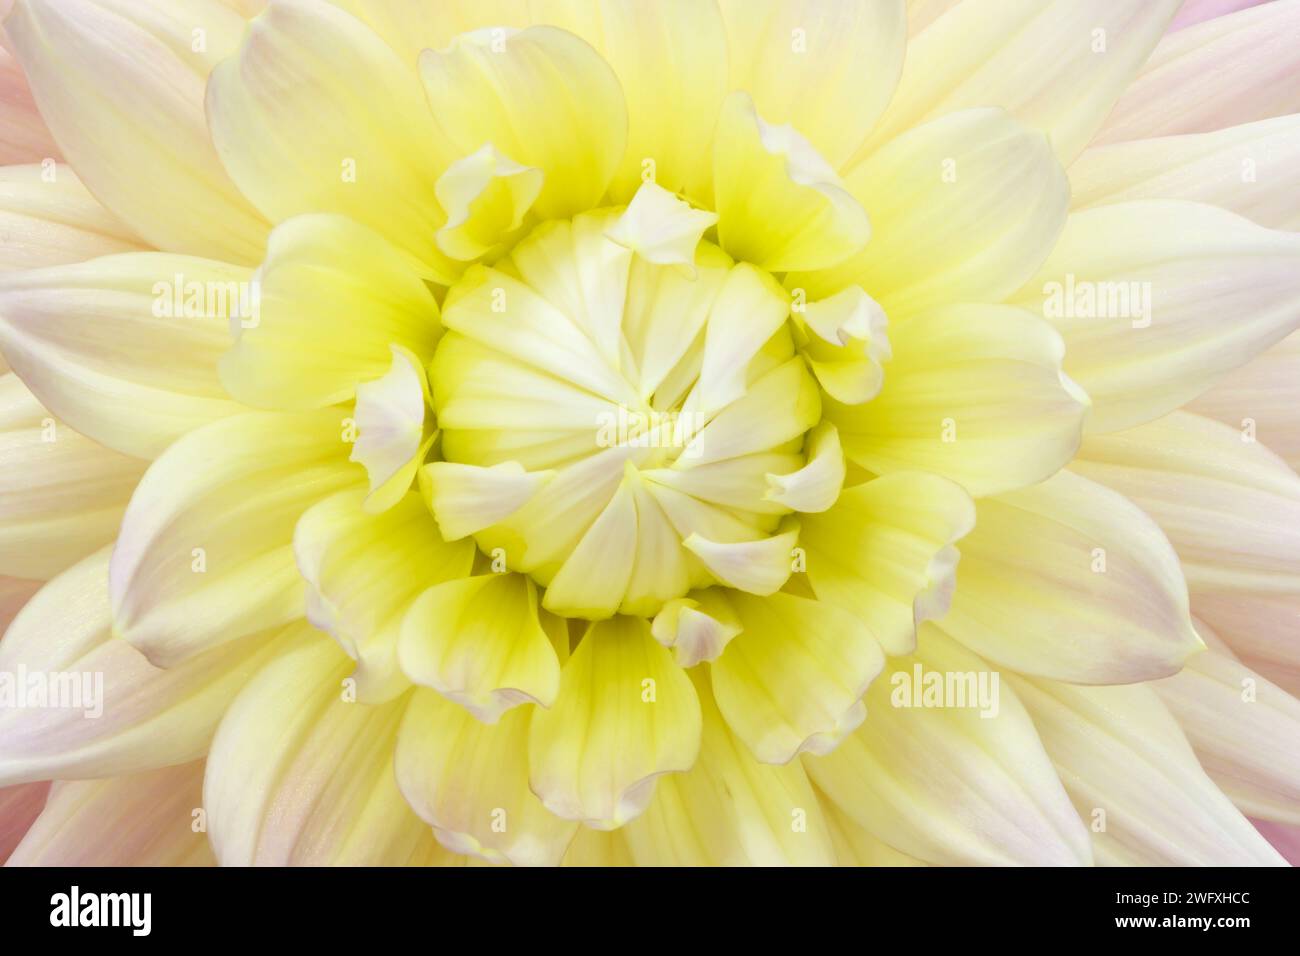 Dahlia Flower. Canfield Fair. Mahoning County Fair. Canfield, Youngstown, Ohio, USA. Stock Photo